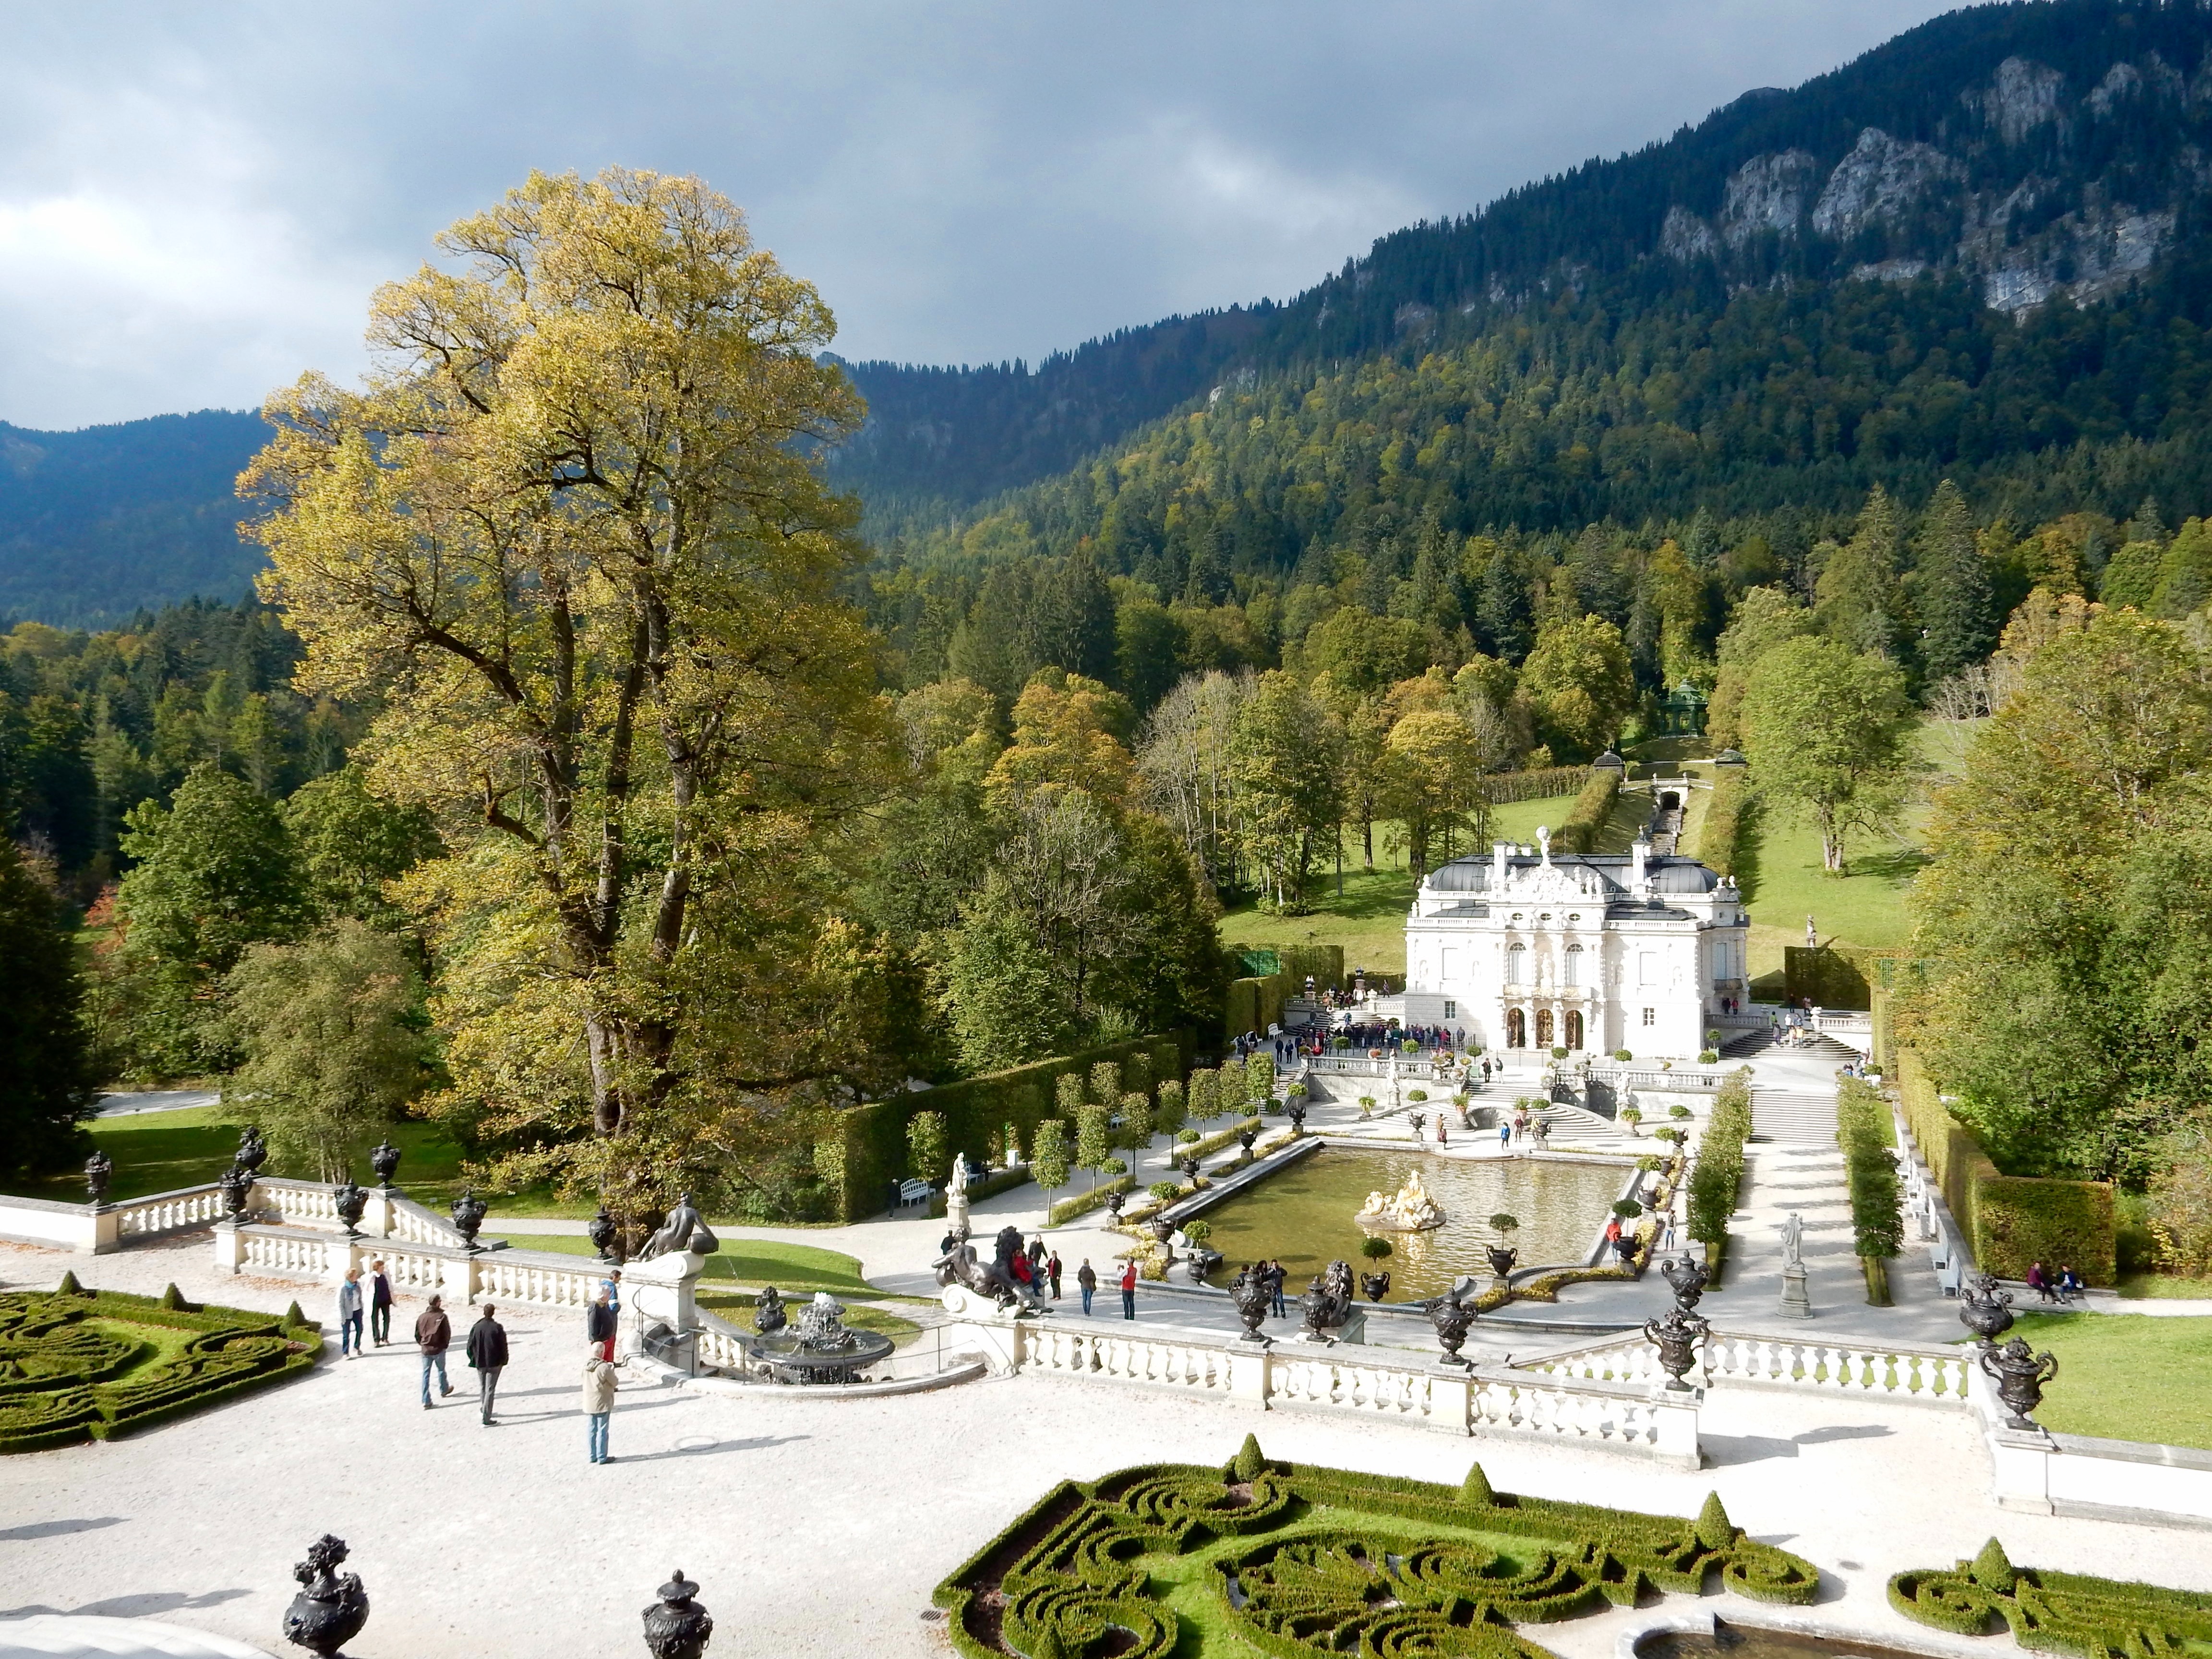 Private palace of Linderhof